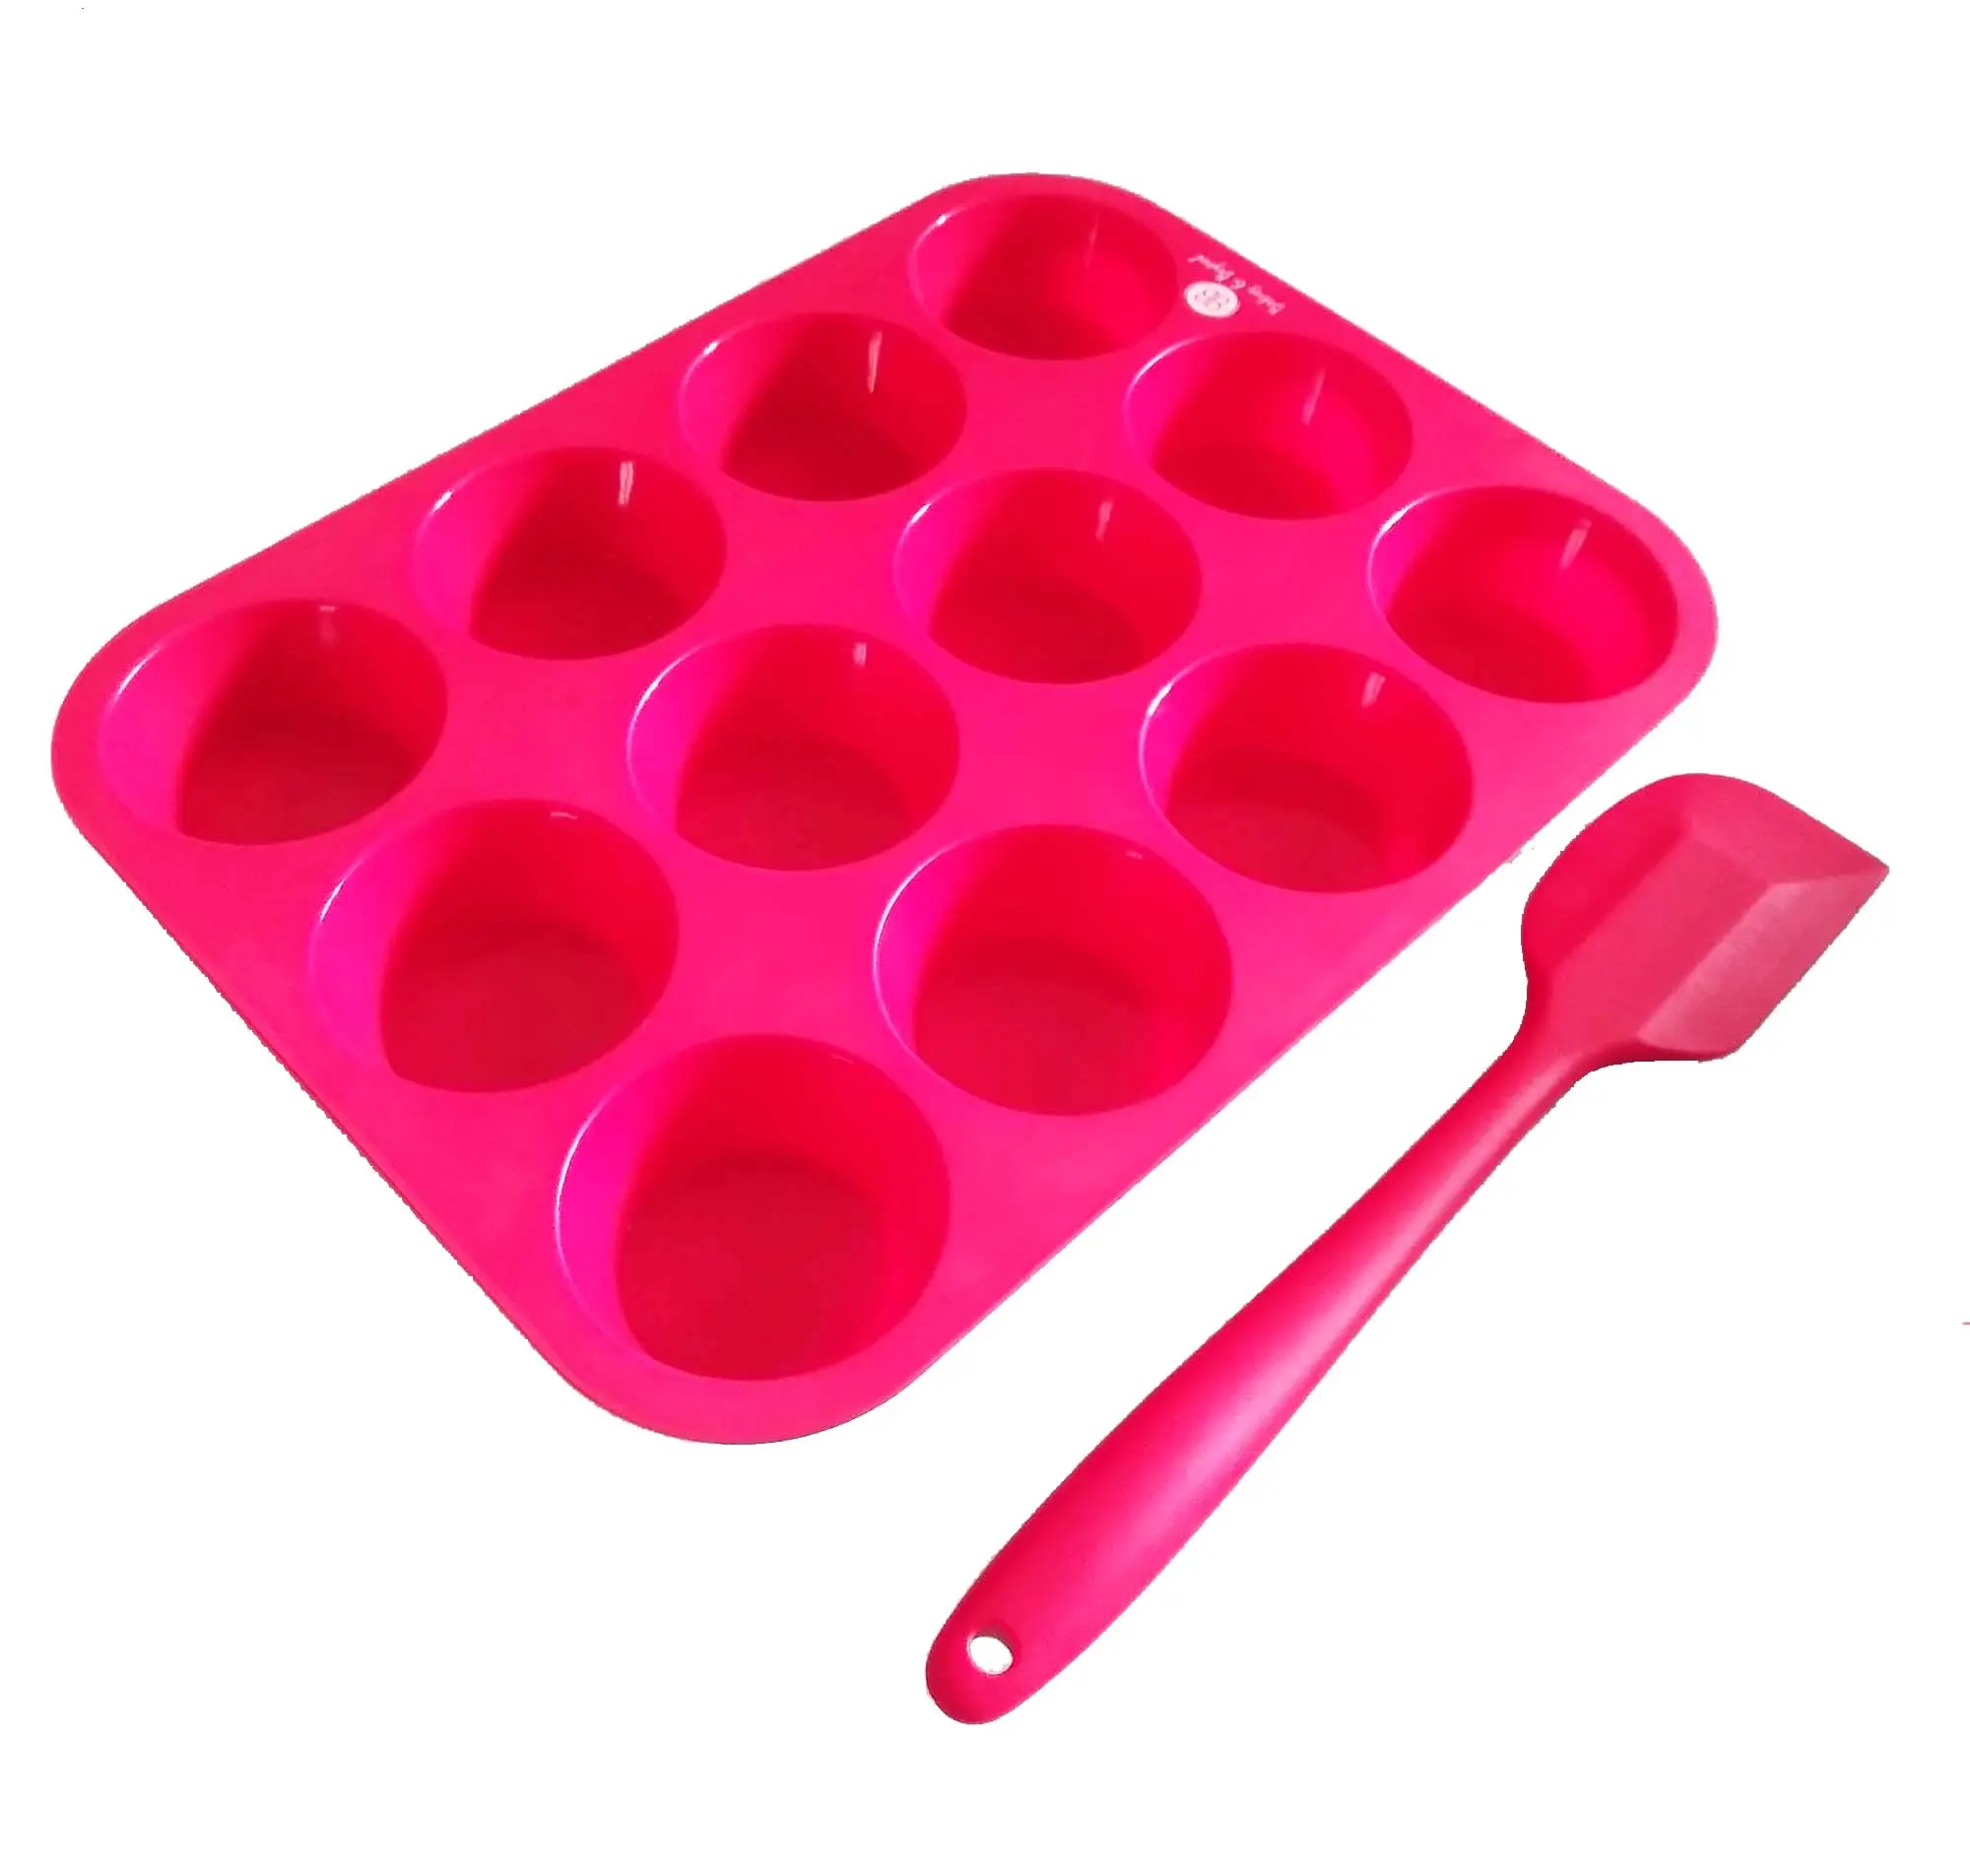 Foil paper baking cake cups,muffin cup for Silicone Muffin Cupcake Baking Pan in red,